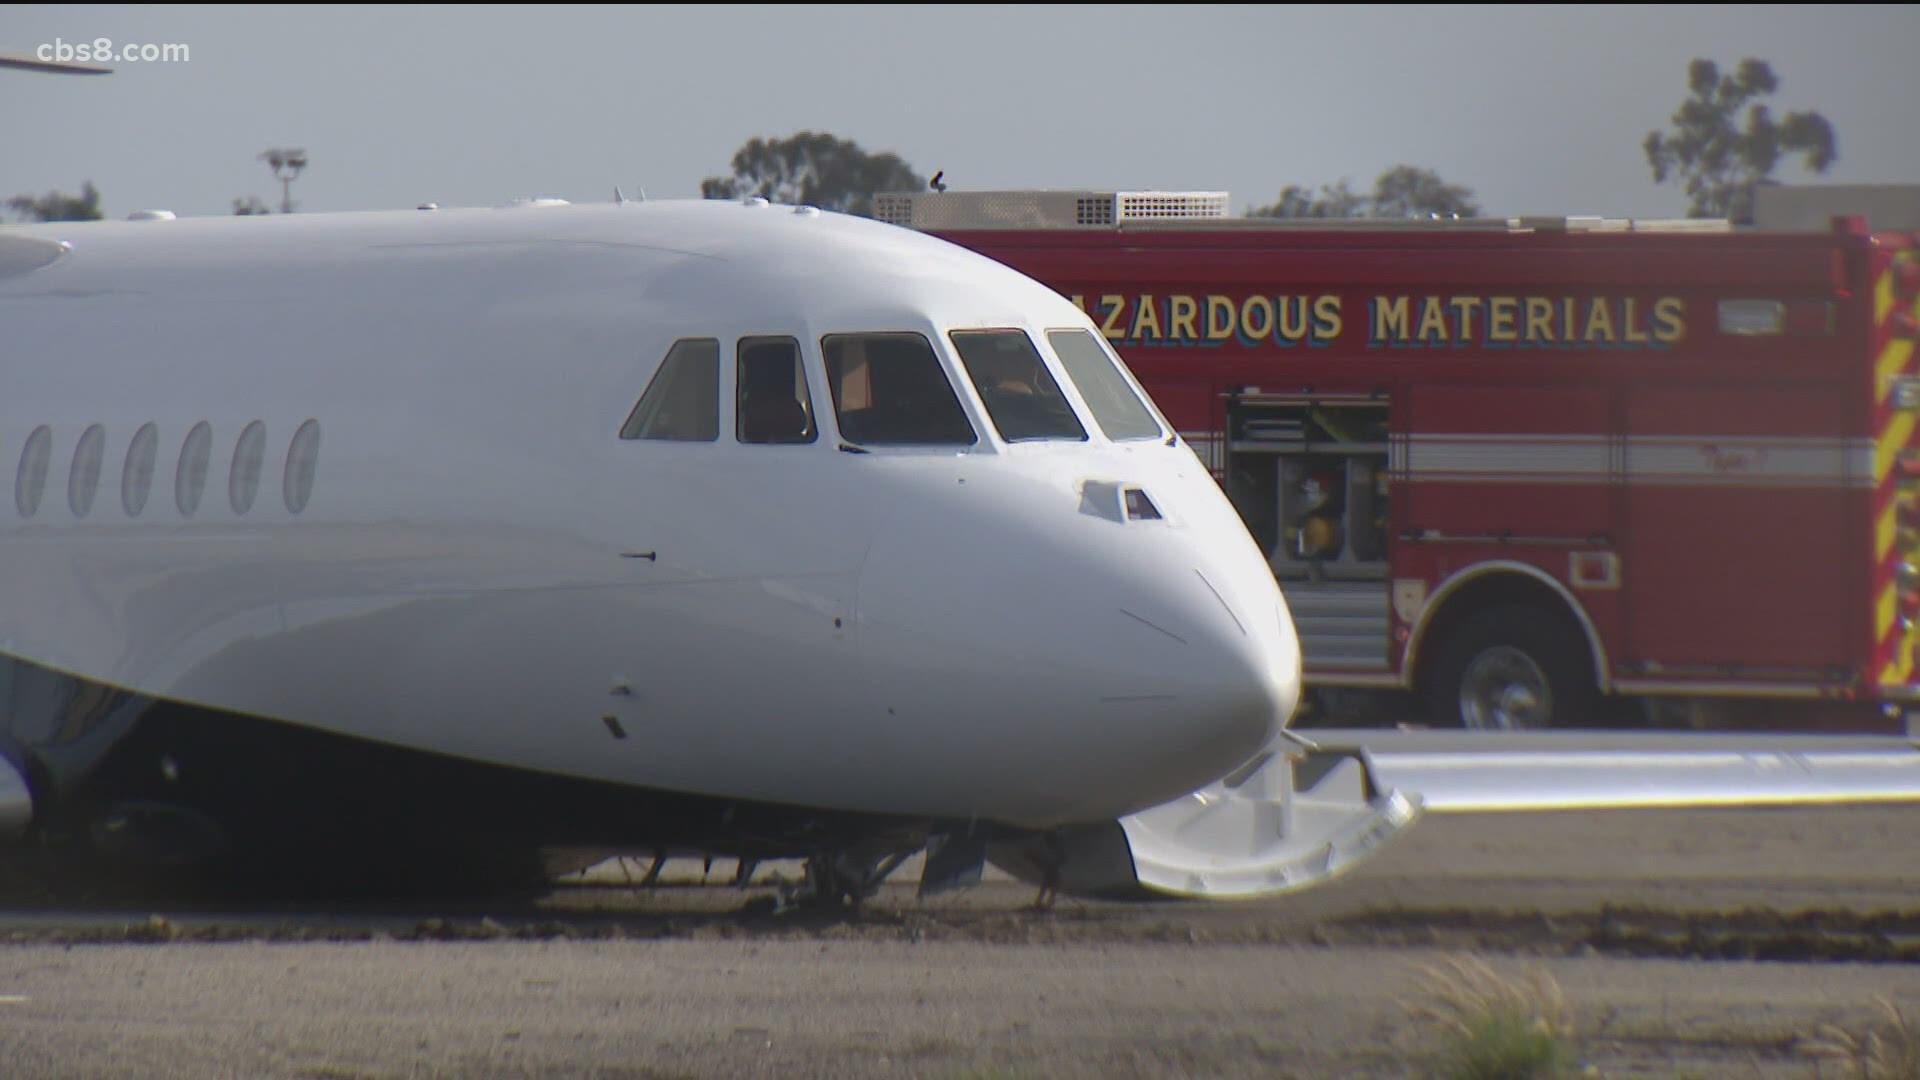 At 11:47 a.m. Saturday, the jet hit the dirt at the end of the runway and lost its wheels.